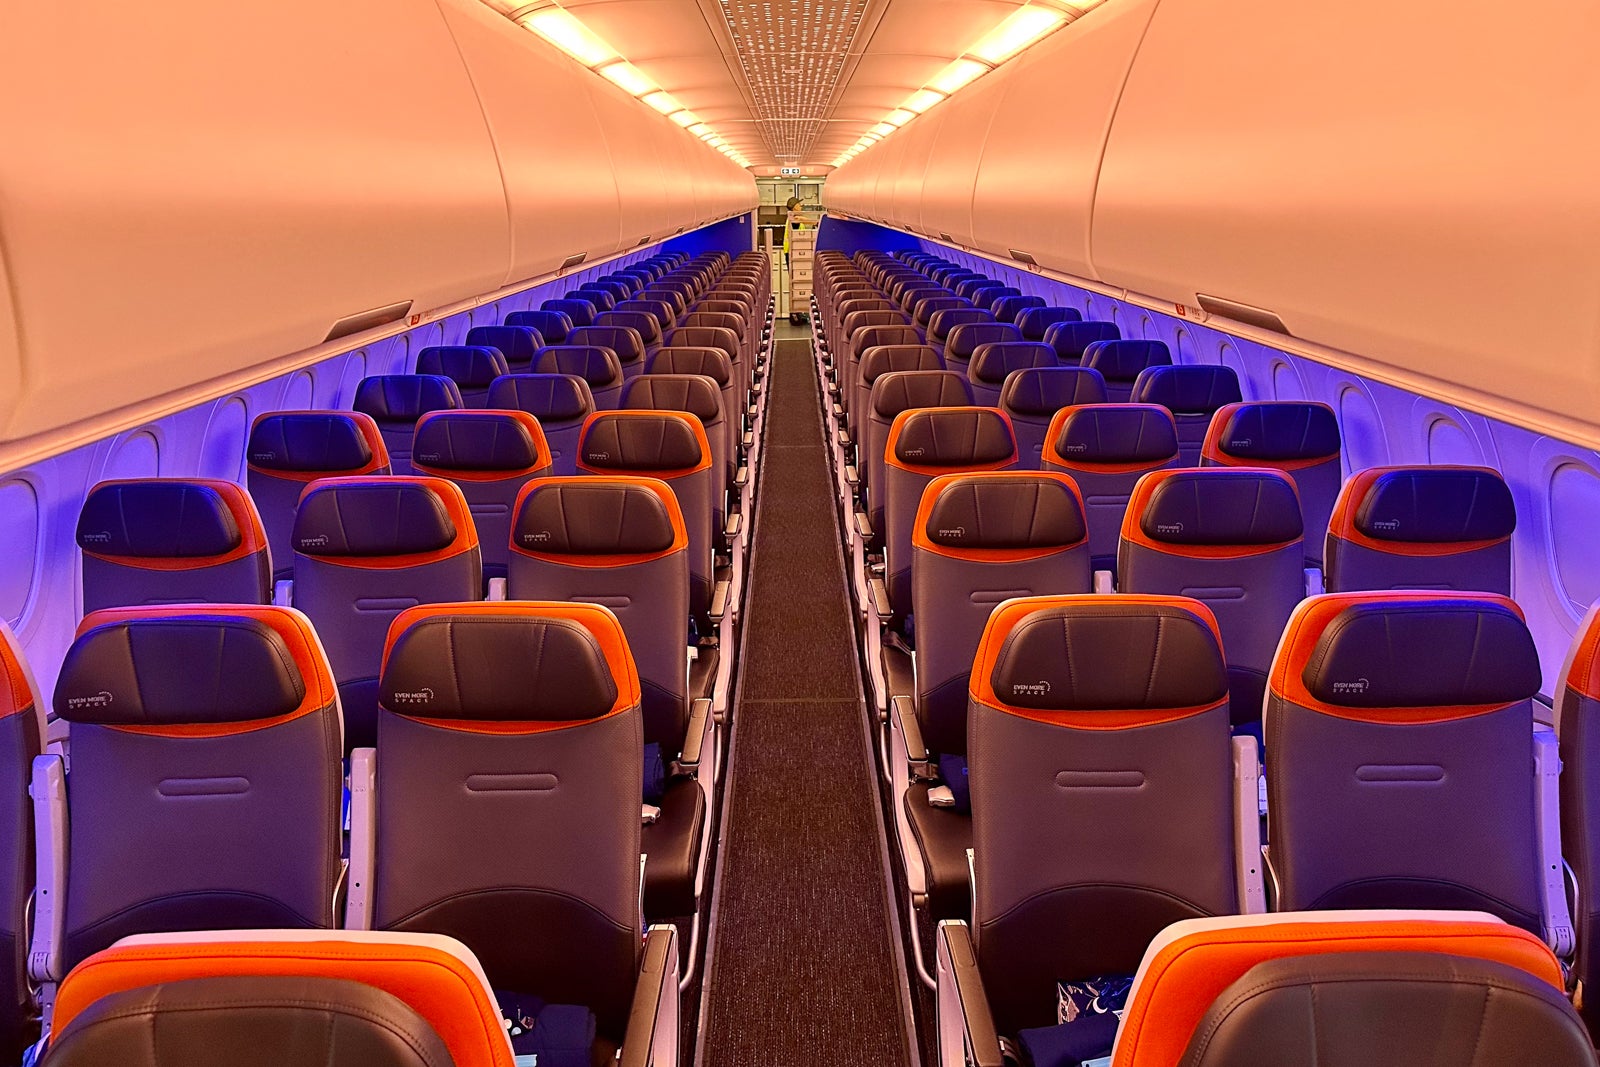 Inside the cabin of an airplane